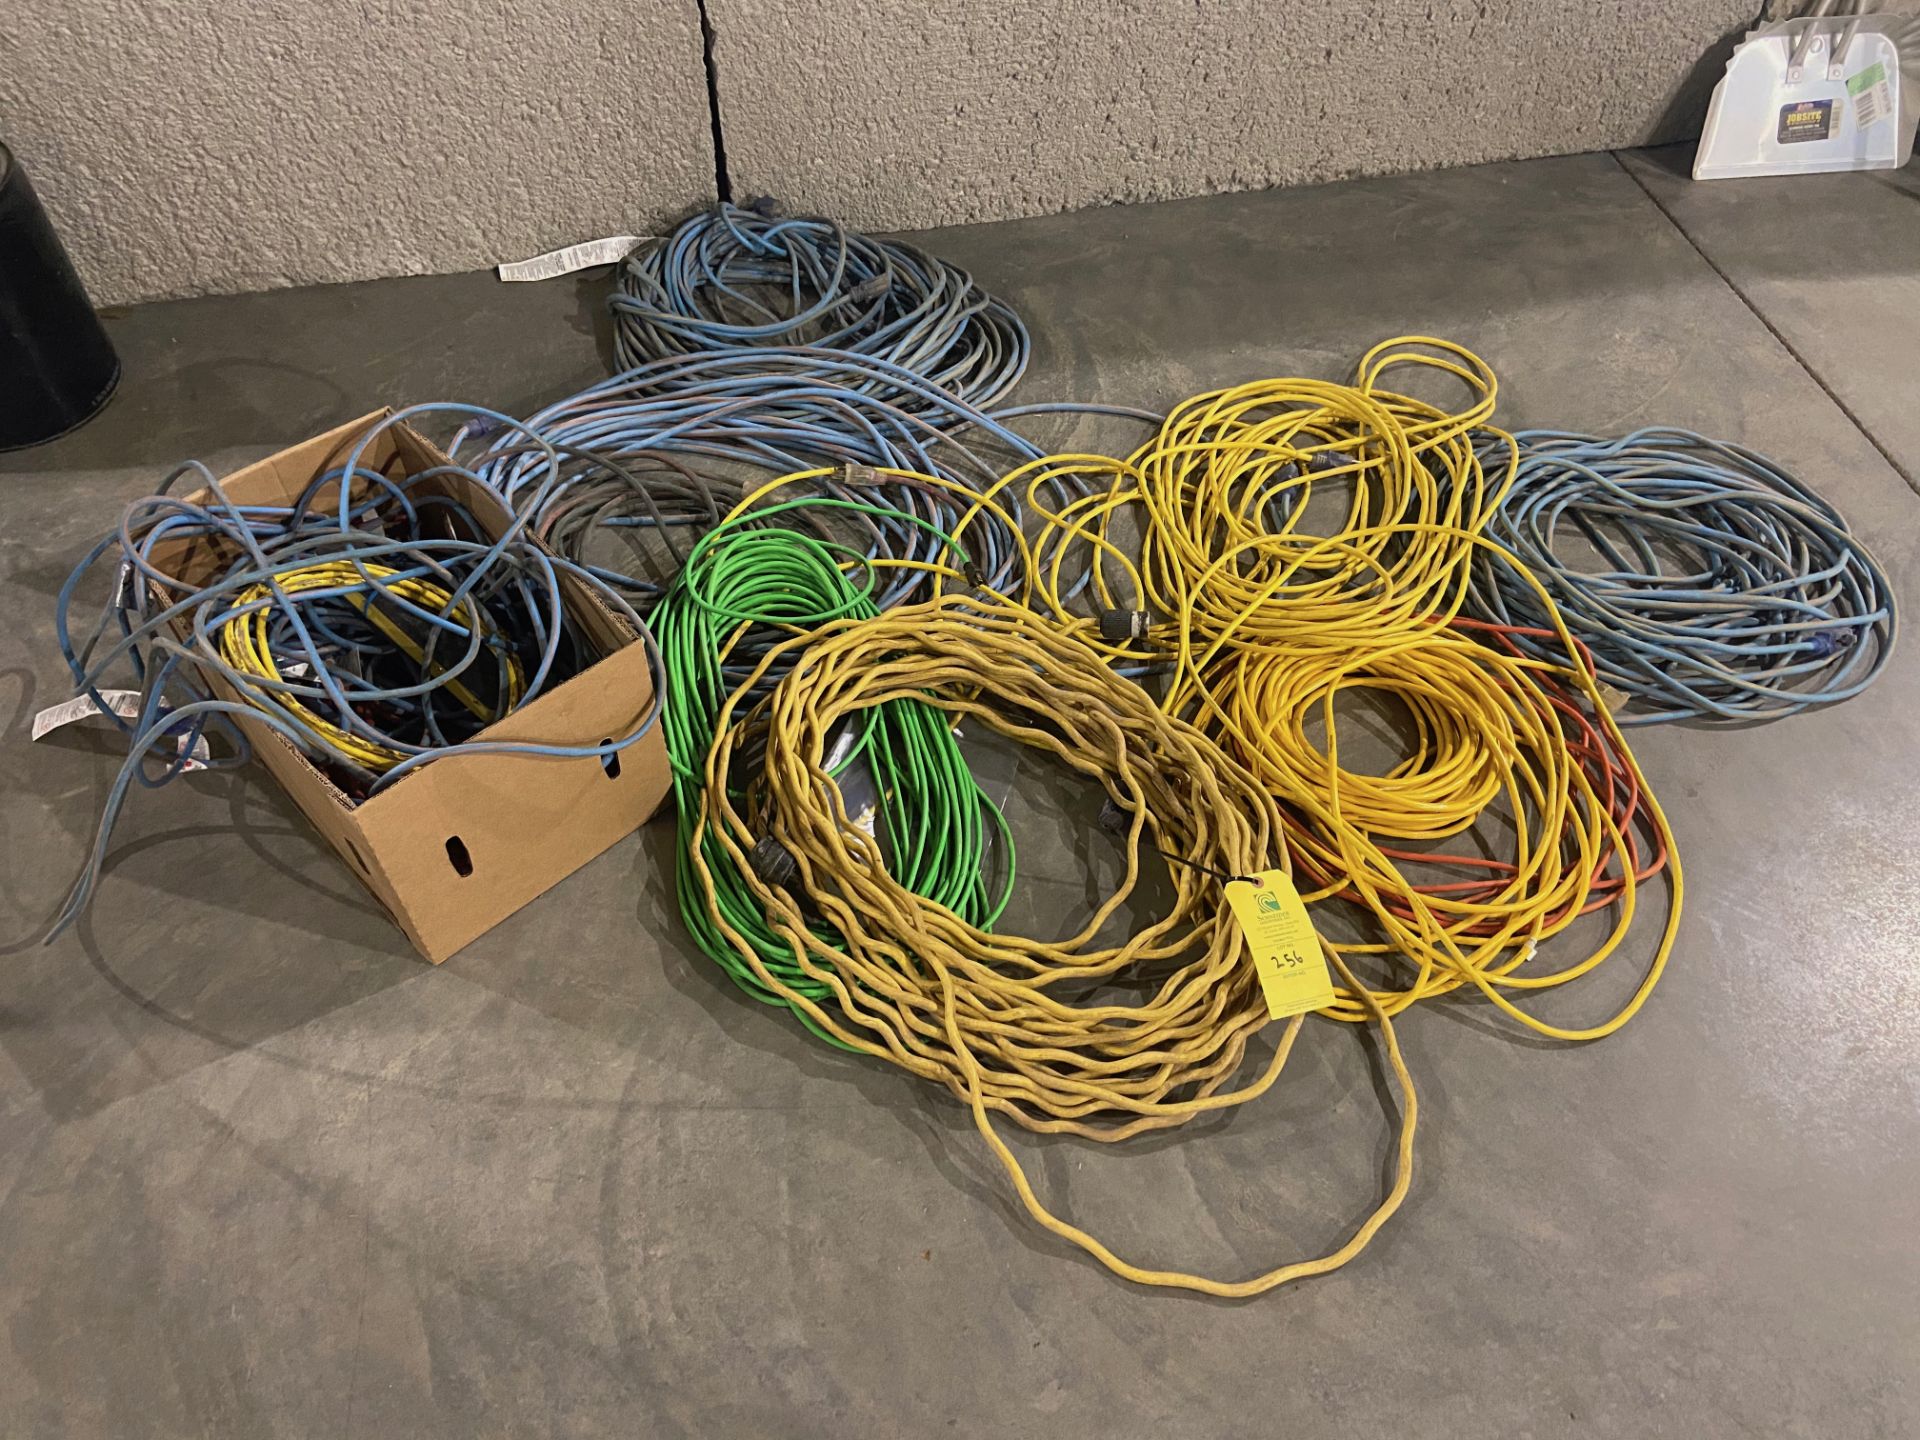 Extension Cords (All Pictured) Rigging Fee: $10